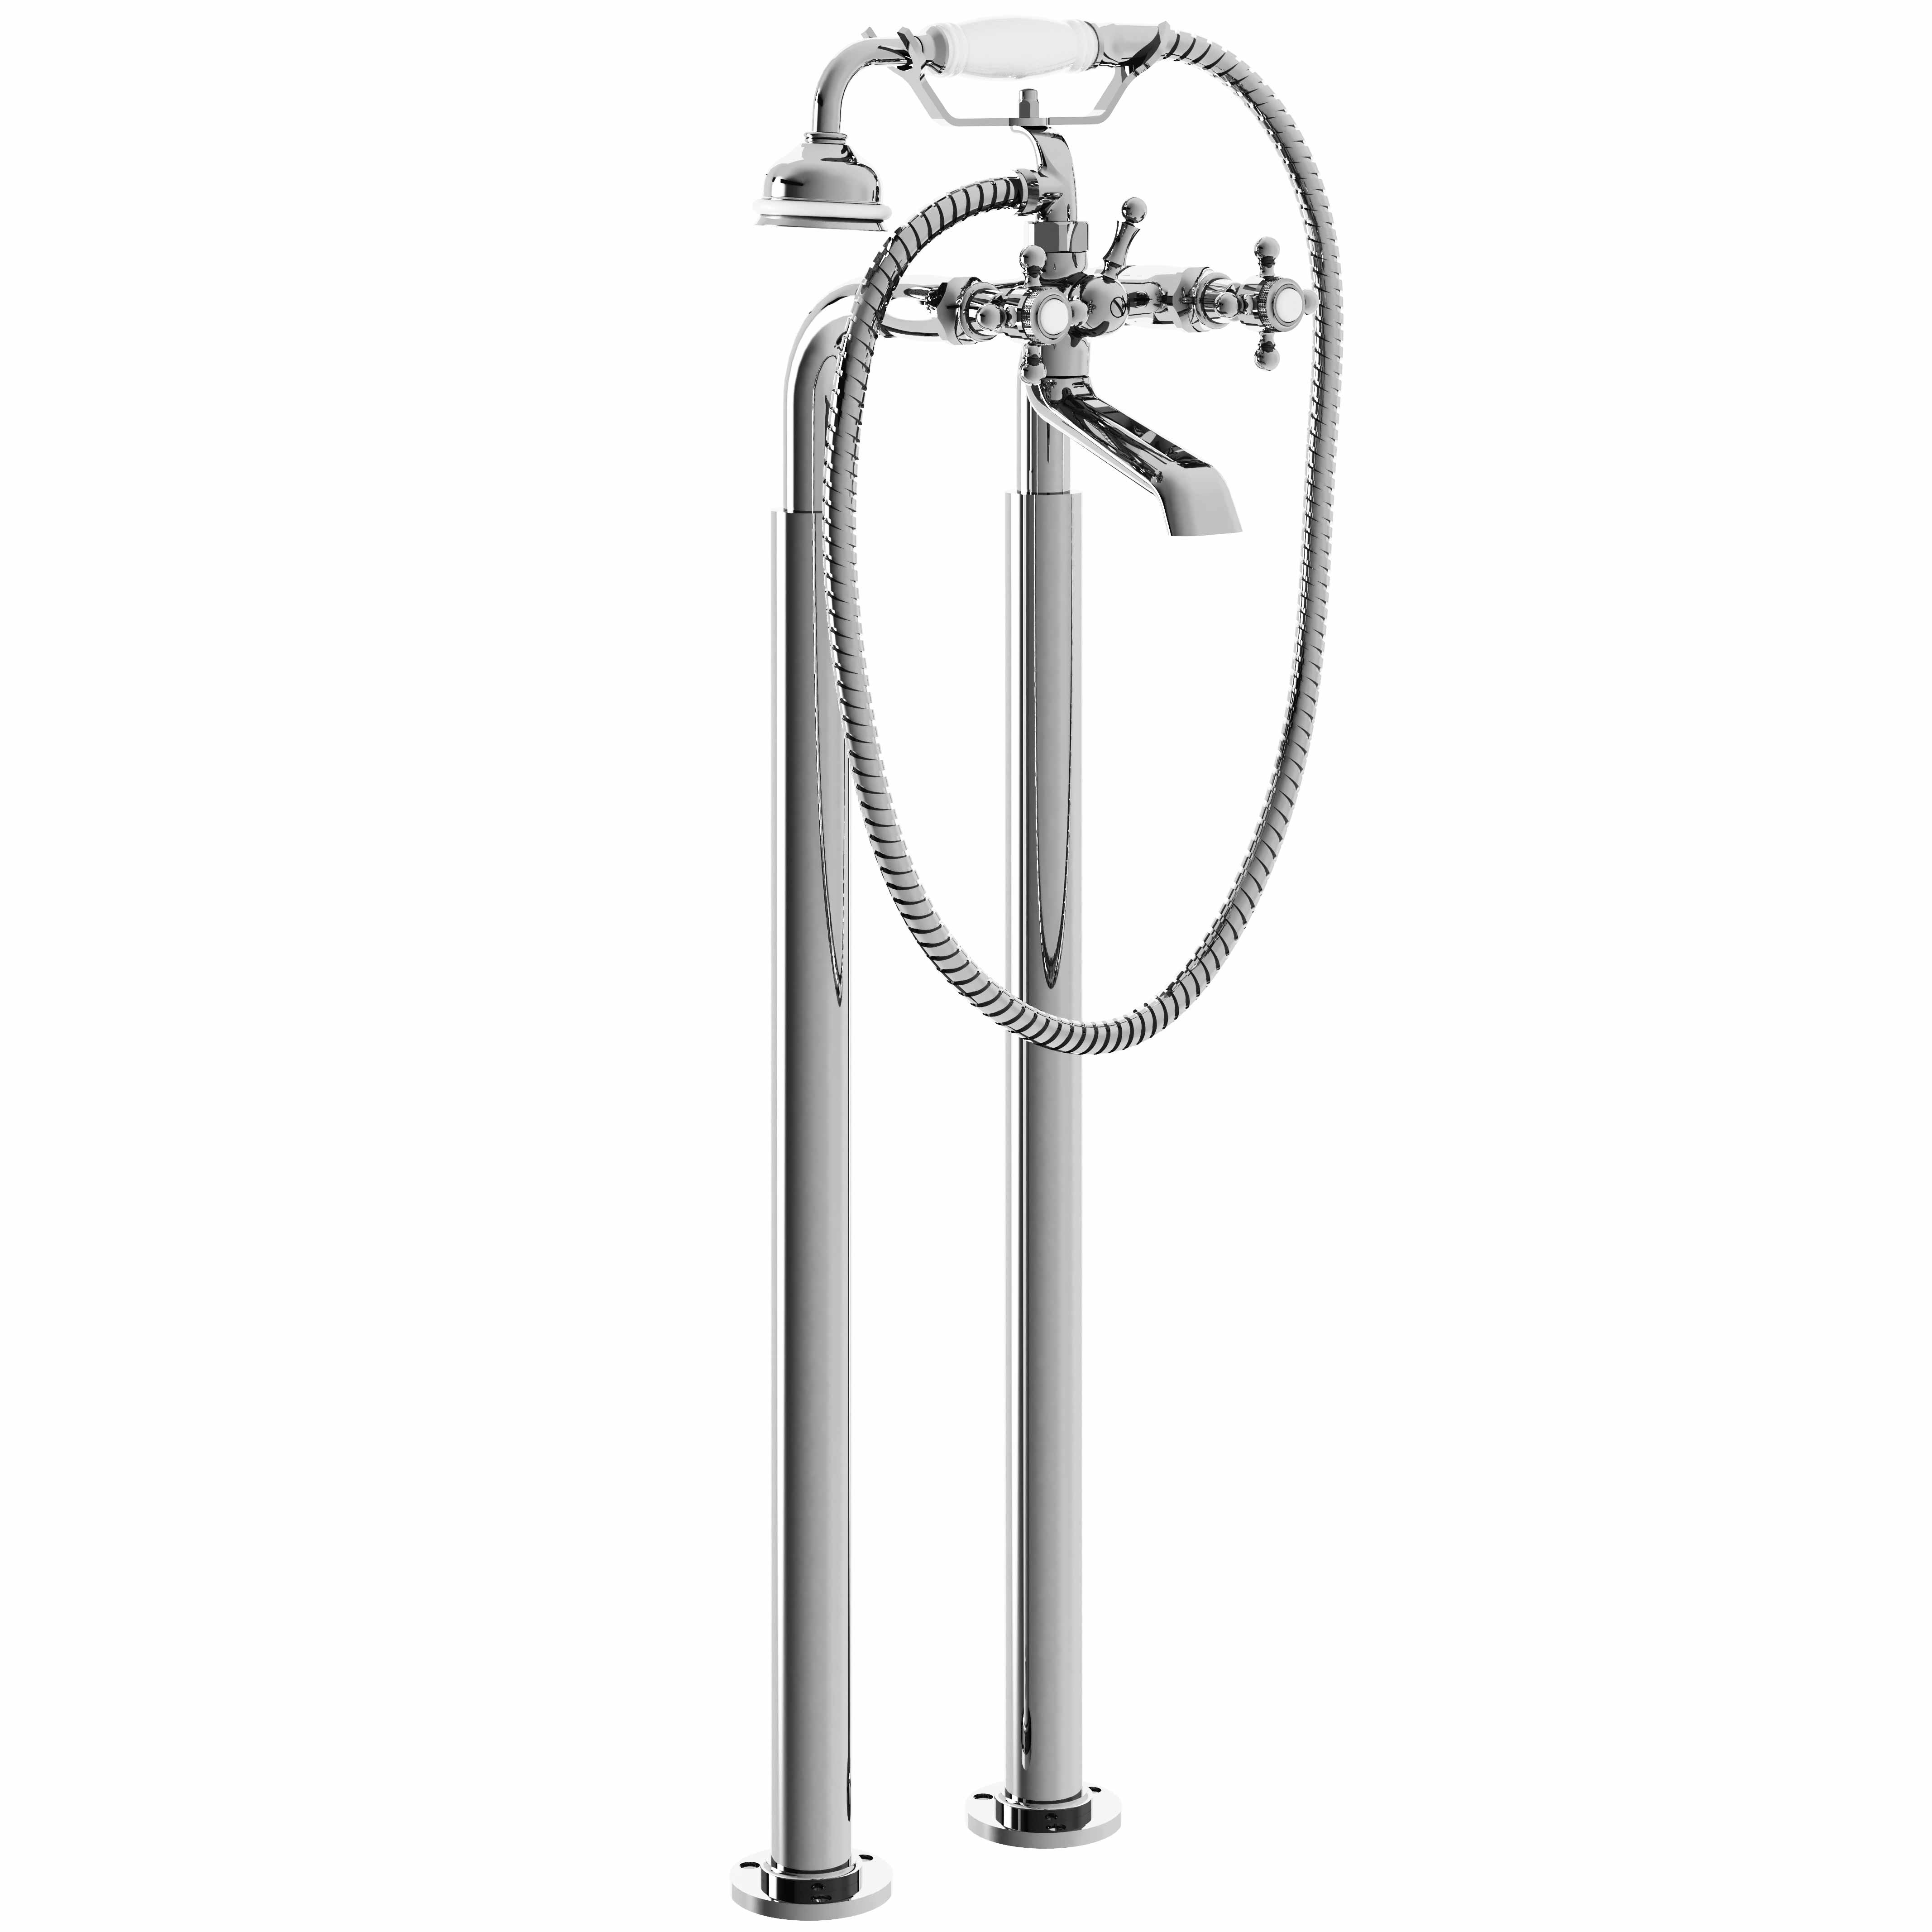 M20-3309 Floor mounted bath and shower mixer